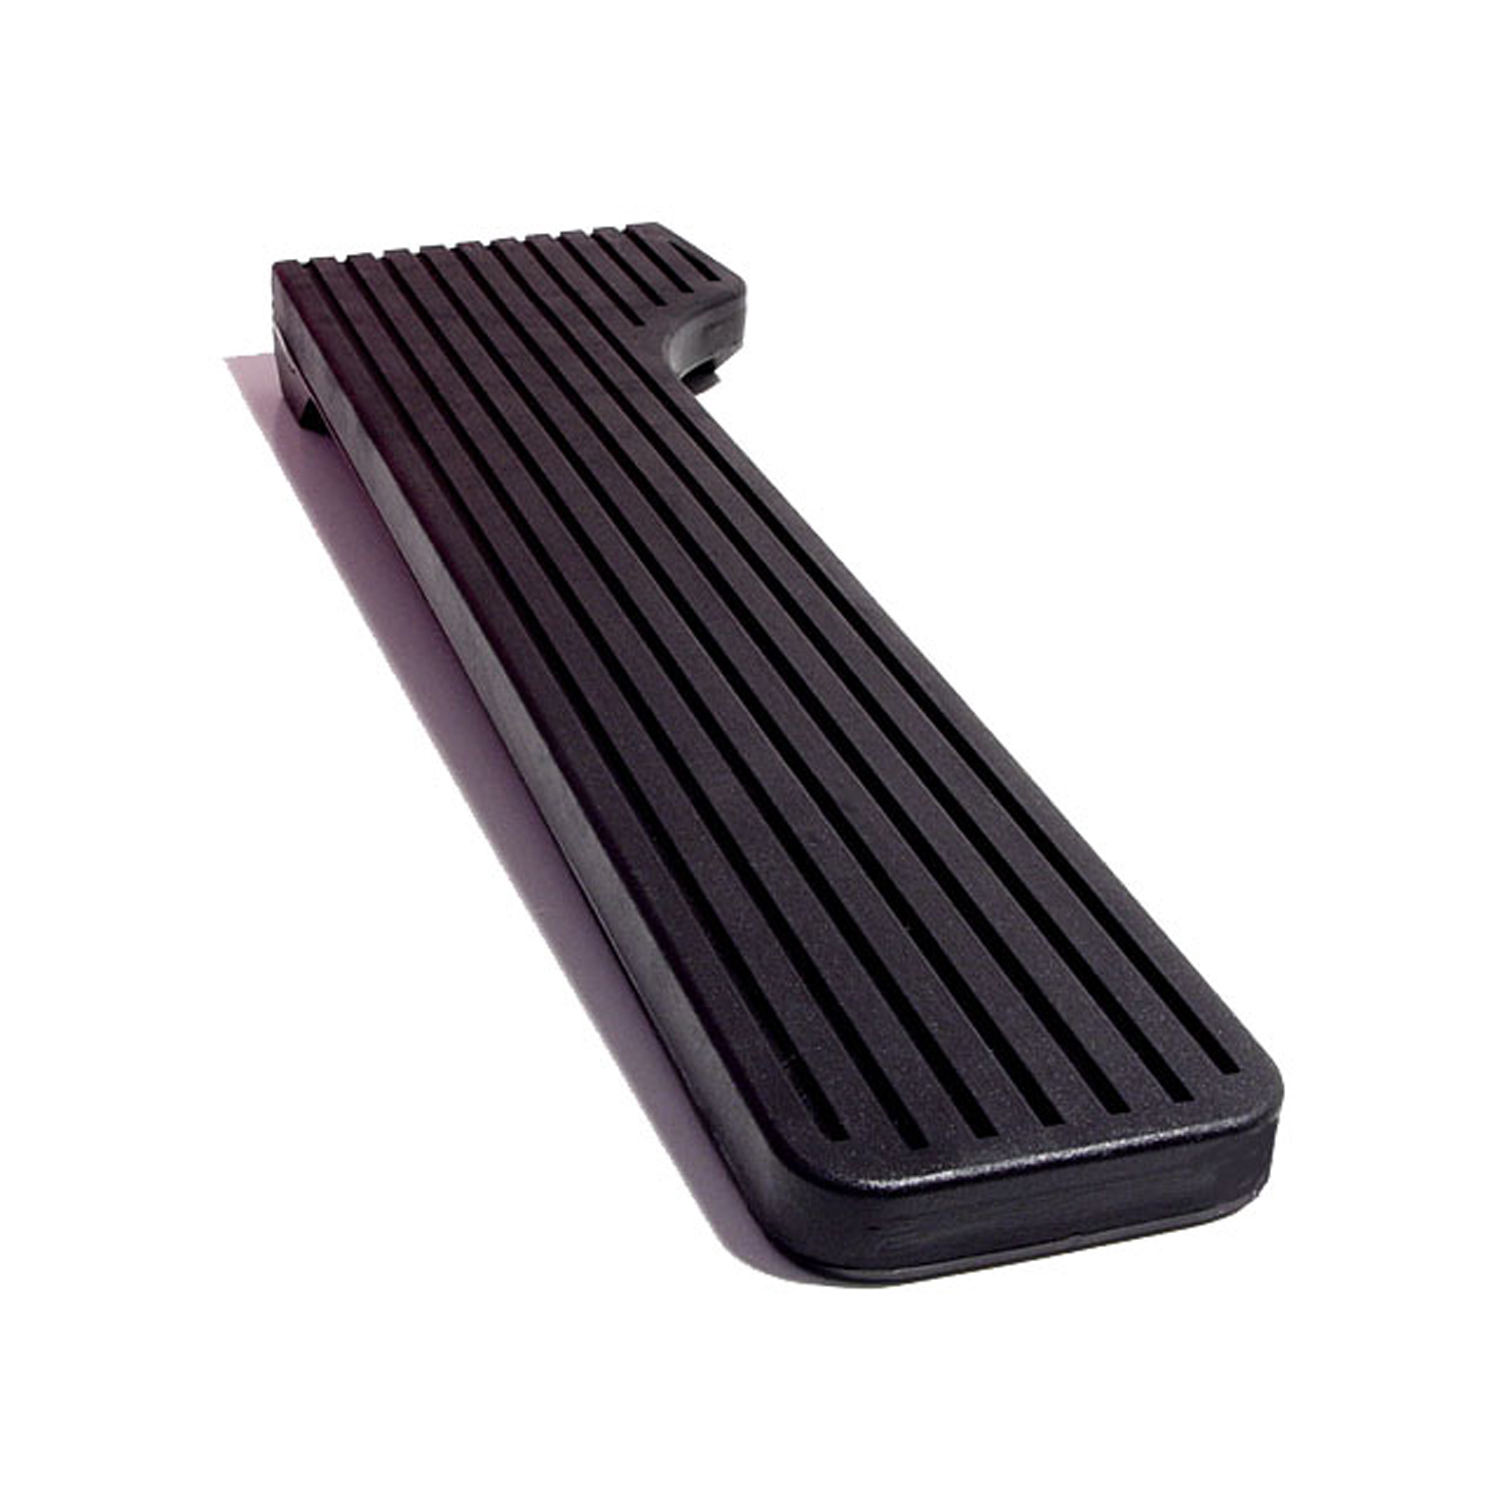 1964 Chevrolet Impala Accelerator Pedal Pad without flange-AP 31-B